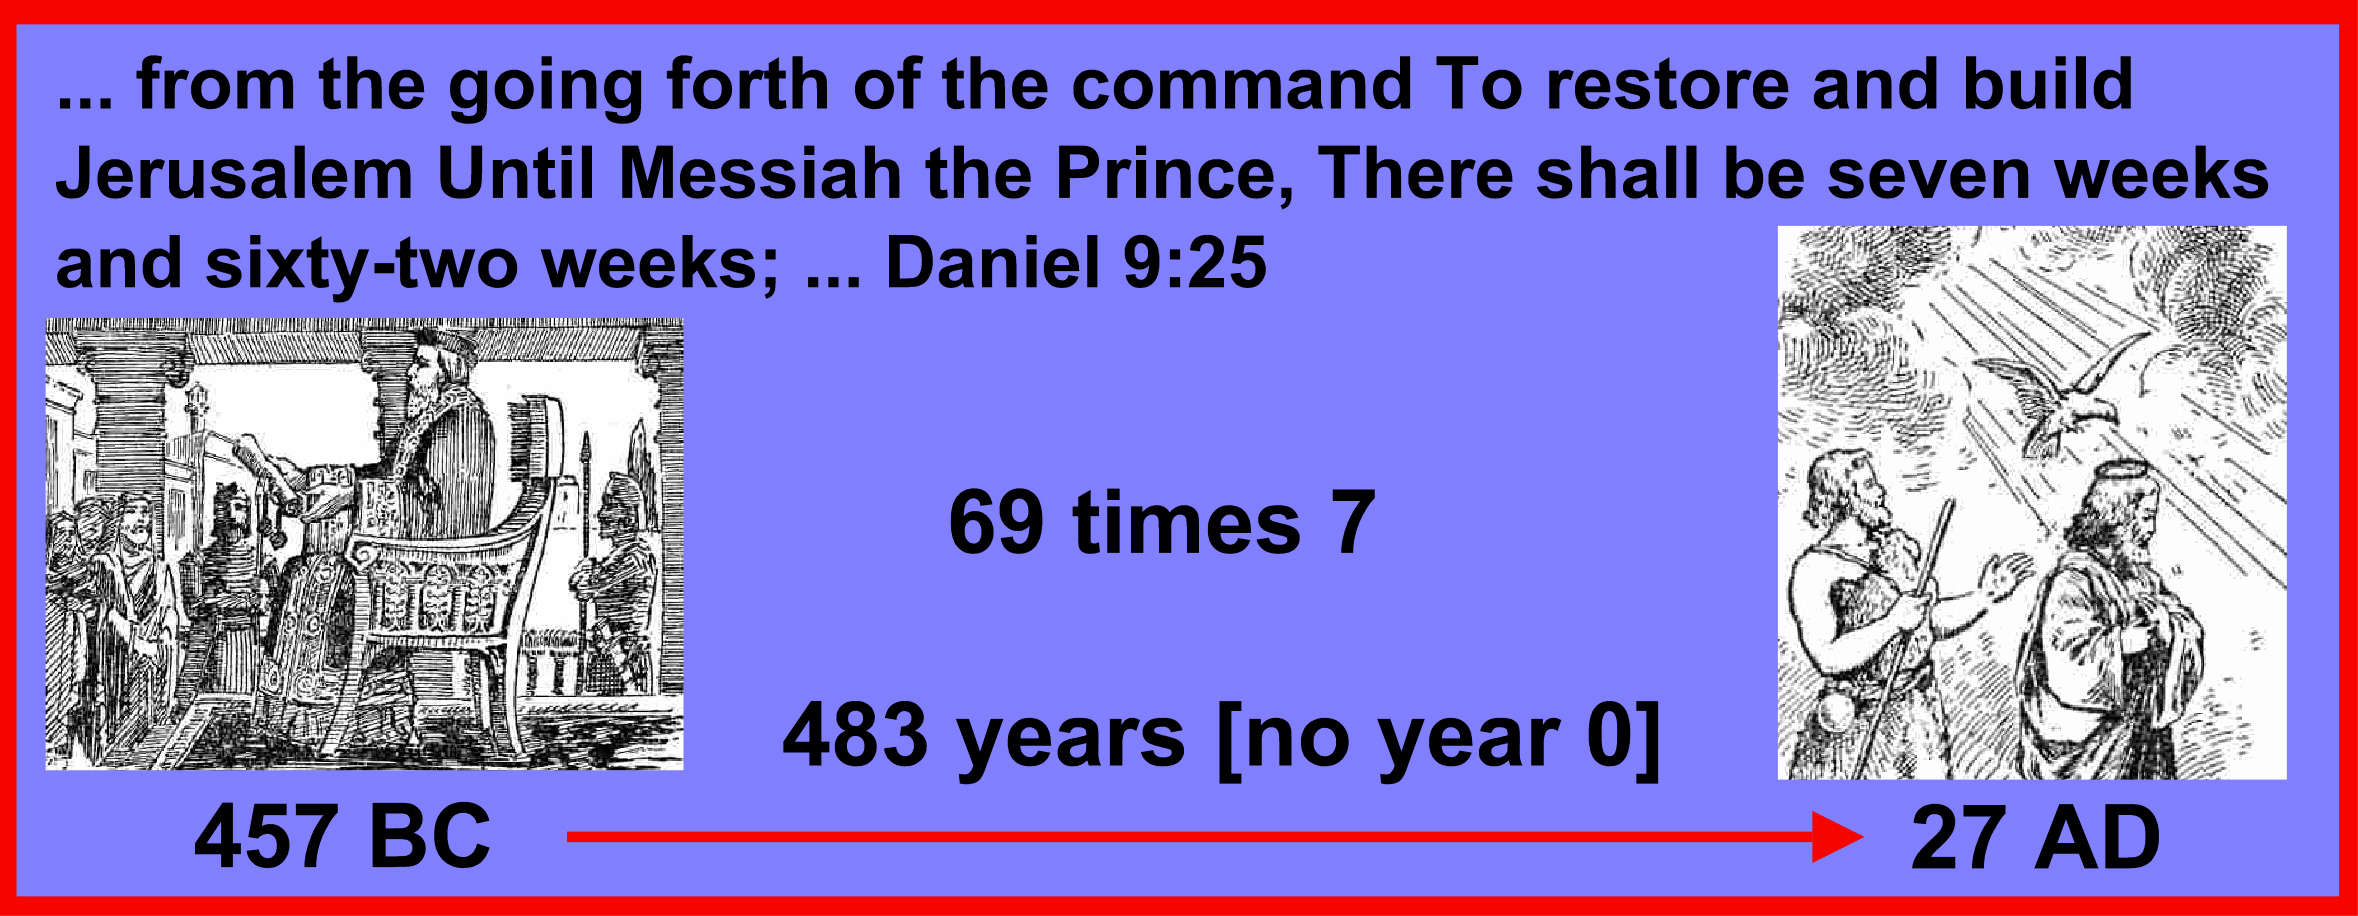 ... from the going forth of the command To restore and build Jerusalem Until Messiah the Prince, There shall be seven weeks and sixty-two weeks; ... Daniel 9:25.